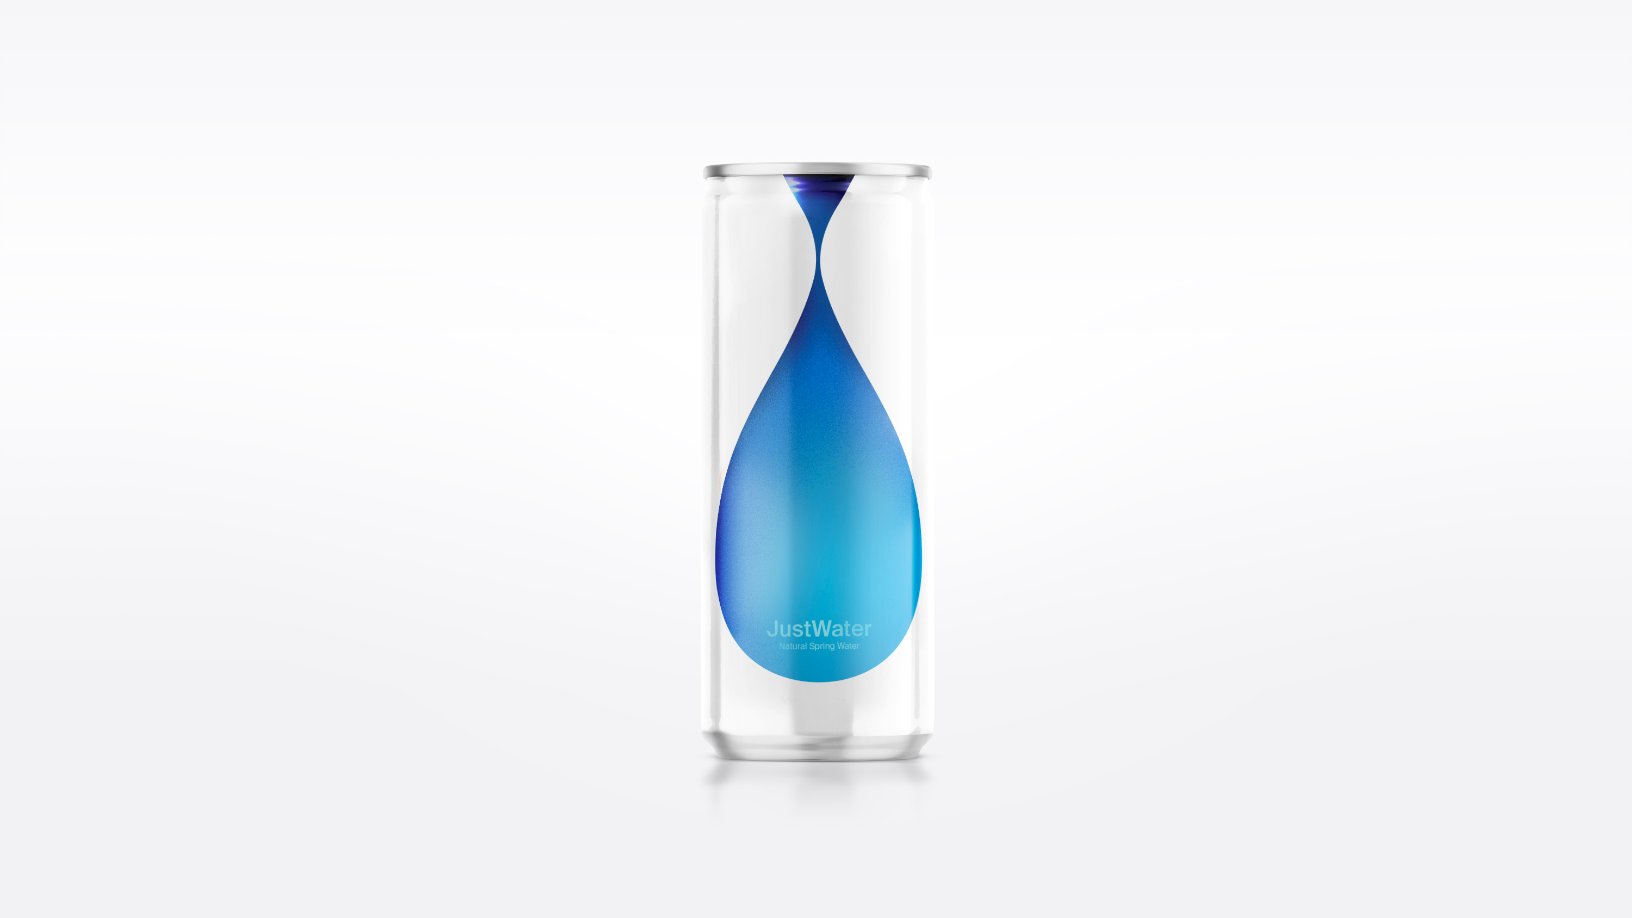 The Sustainability Of JustWater Reflects The Cleanness Of The Product